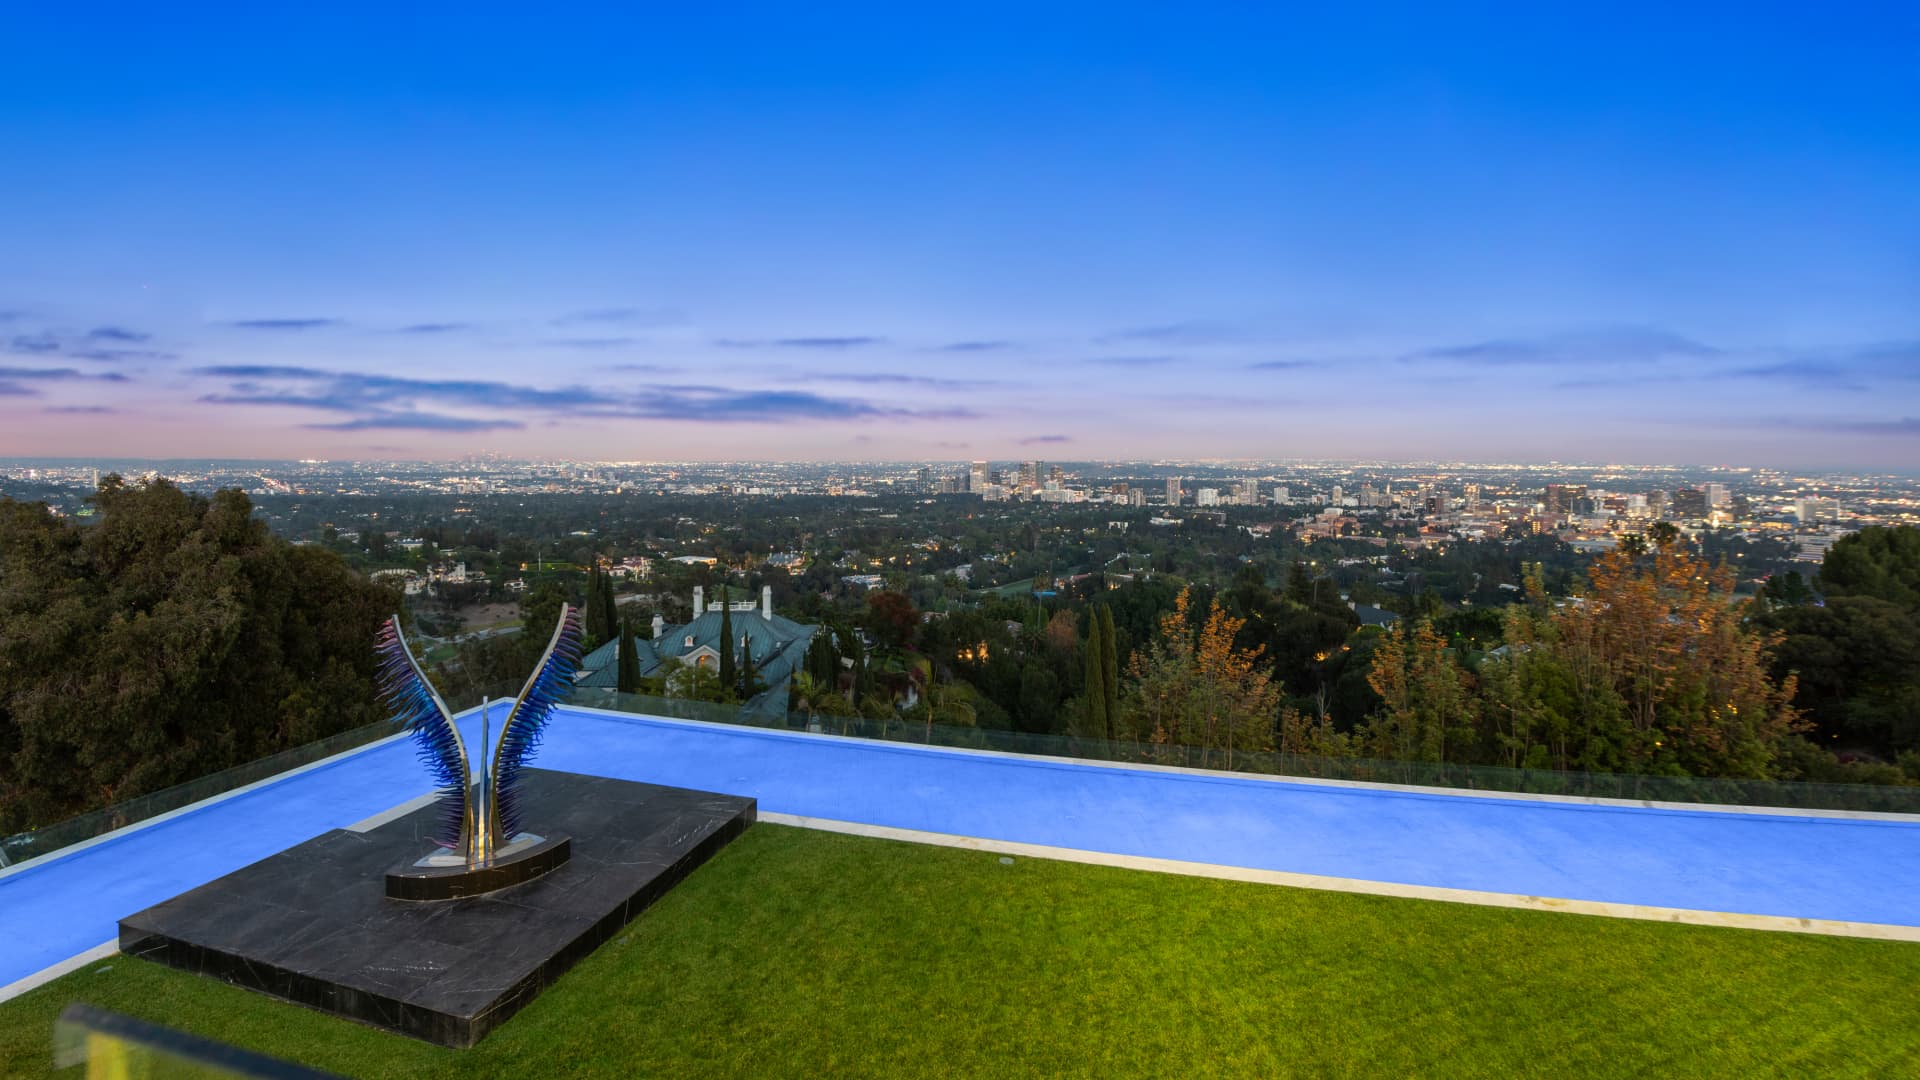 The megahome's view of Los Angeles at dusk.